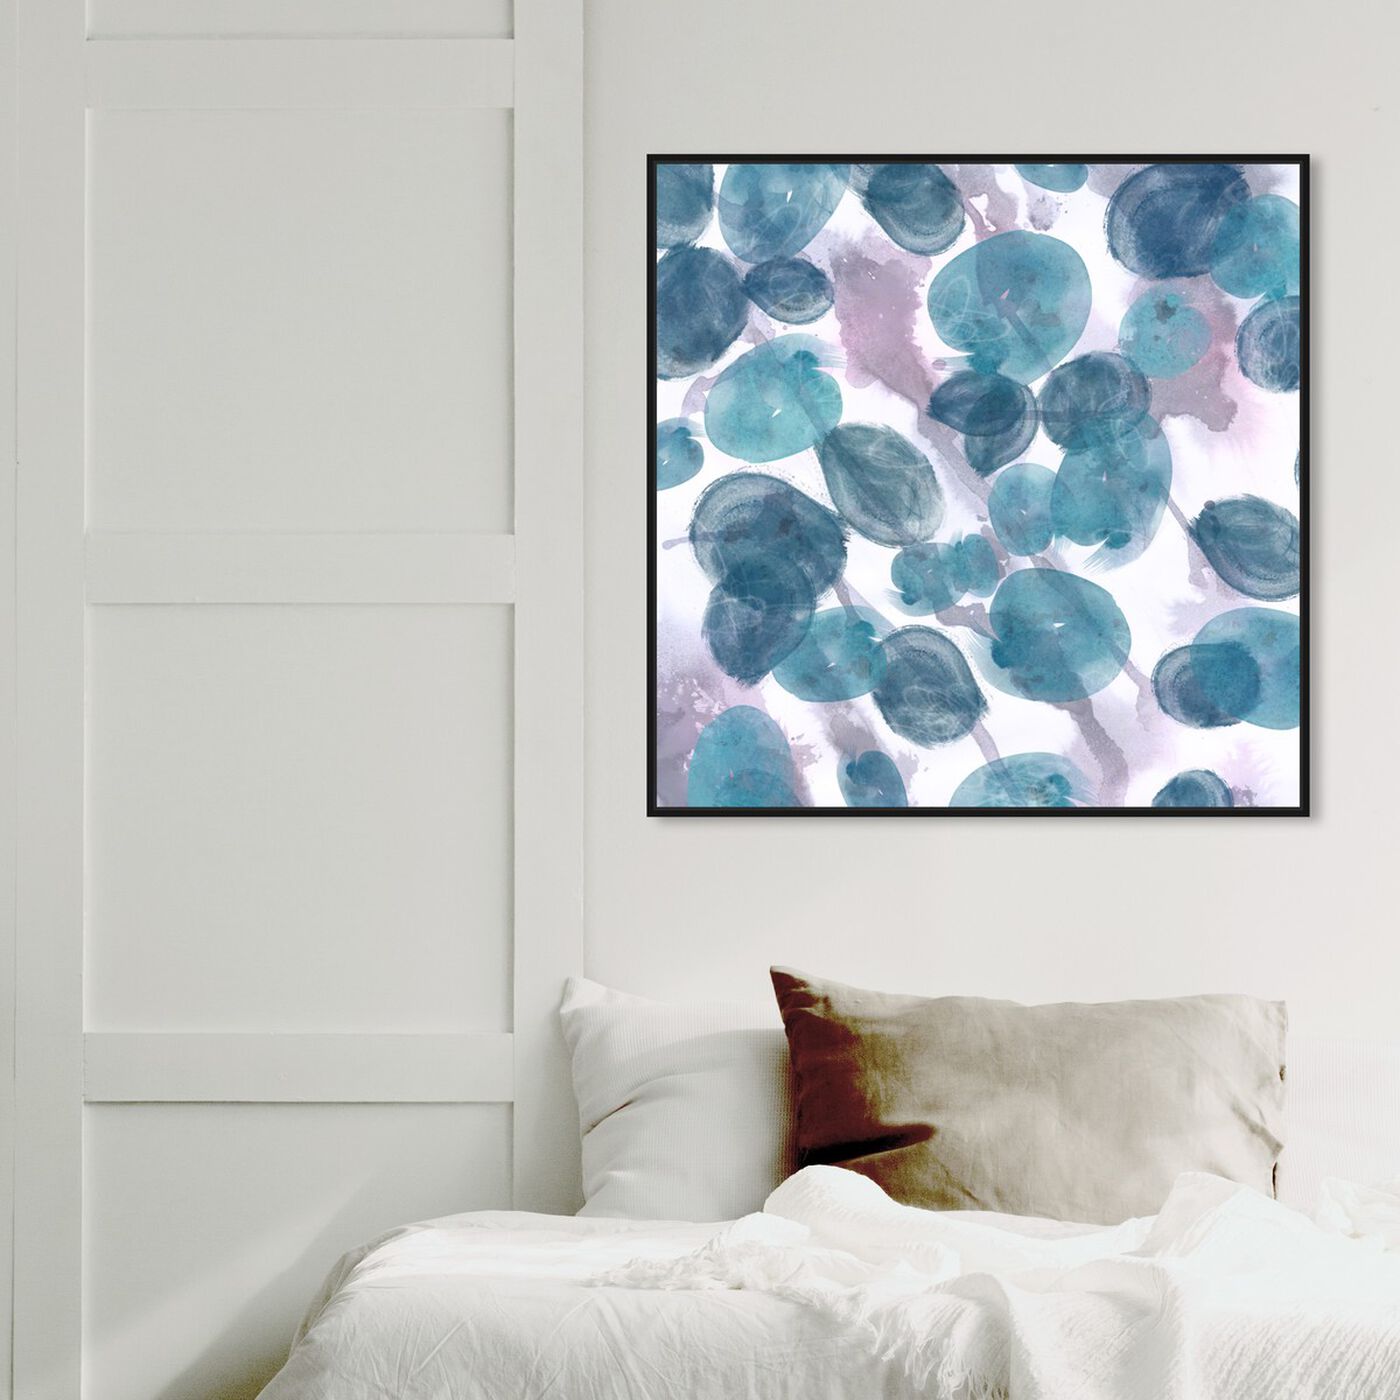 Hanging view of Bubbles featuring abstract and paint art.